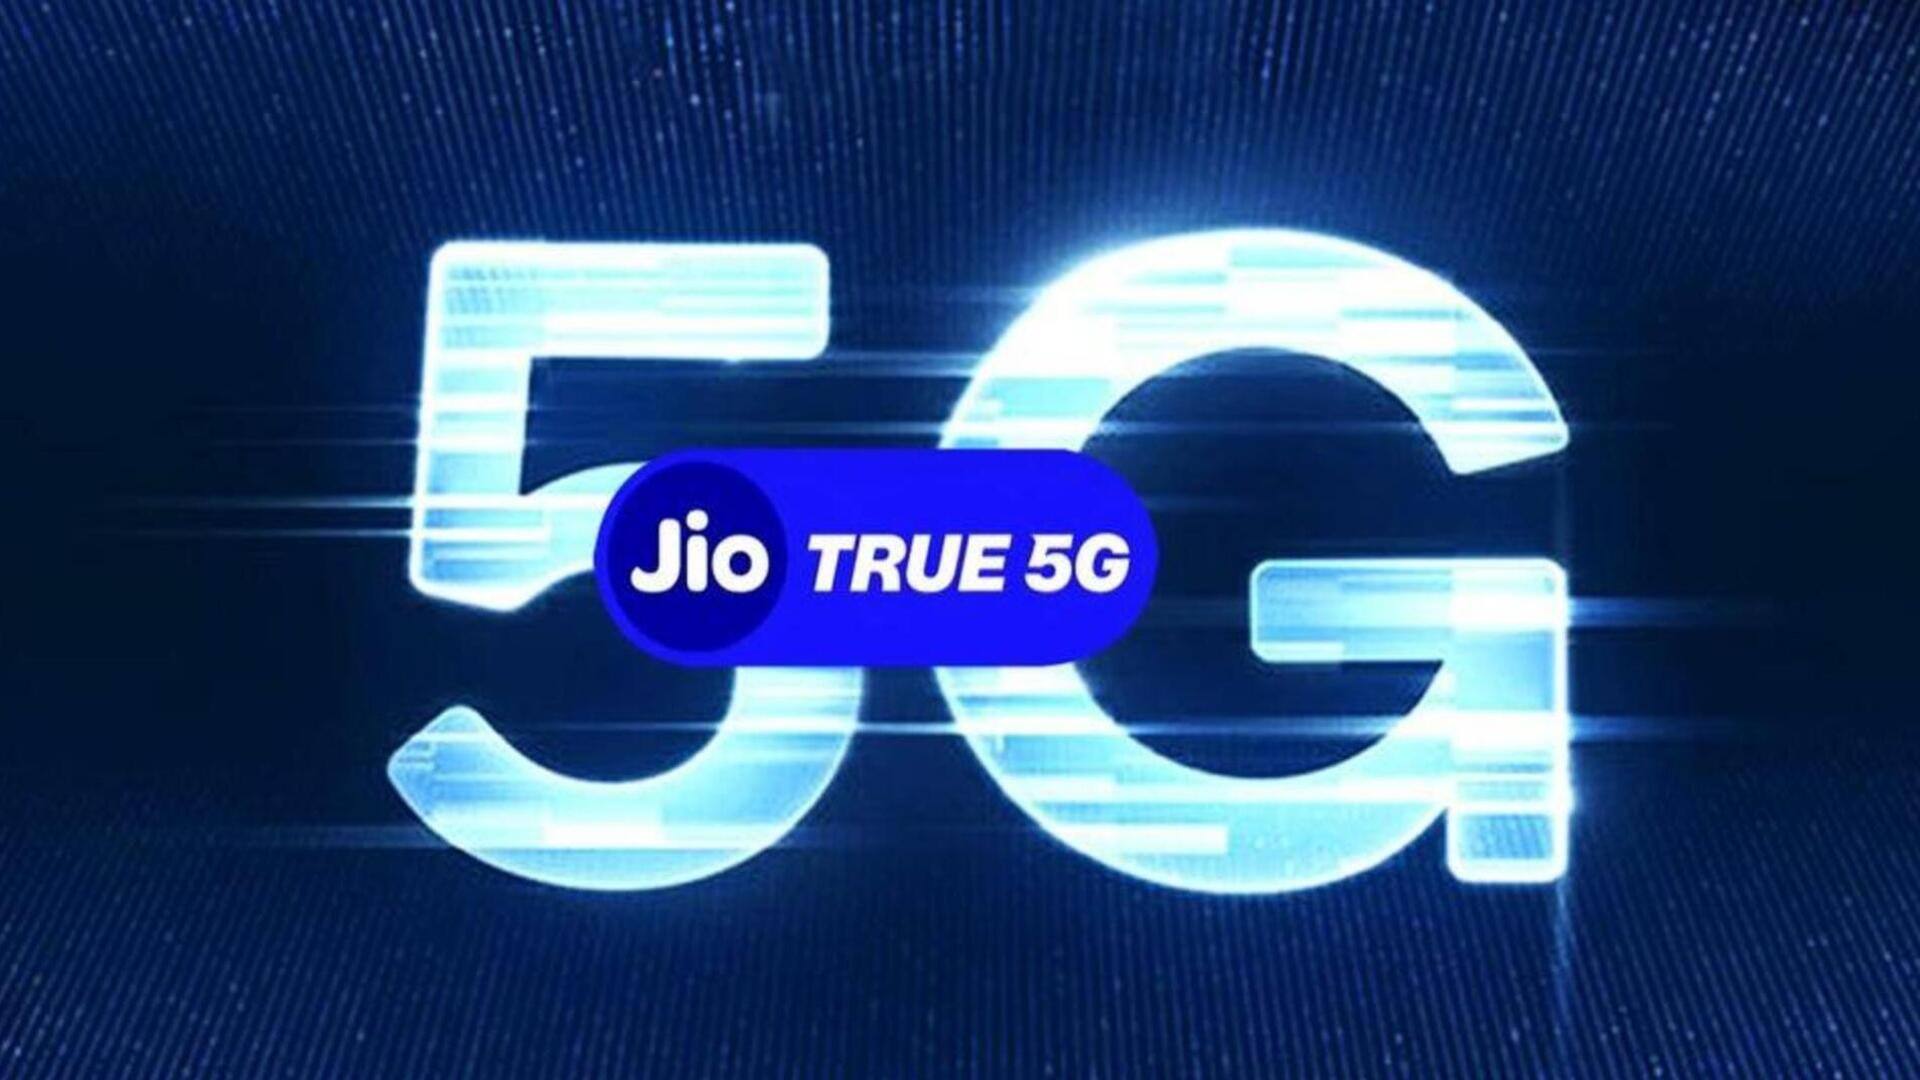 Reliance Jio to complete 5G network rollout by December